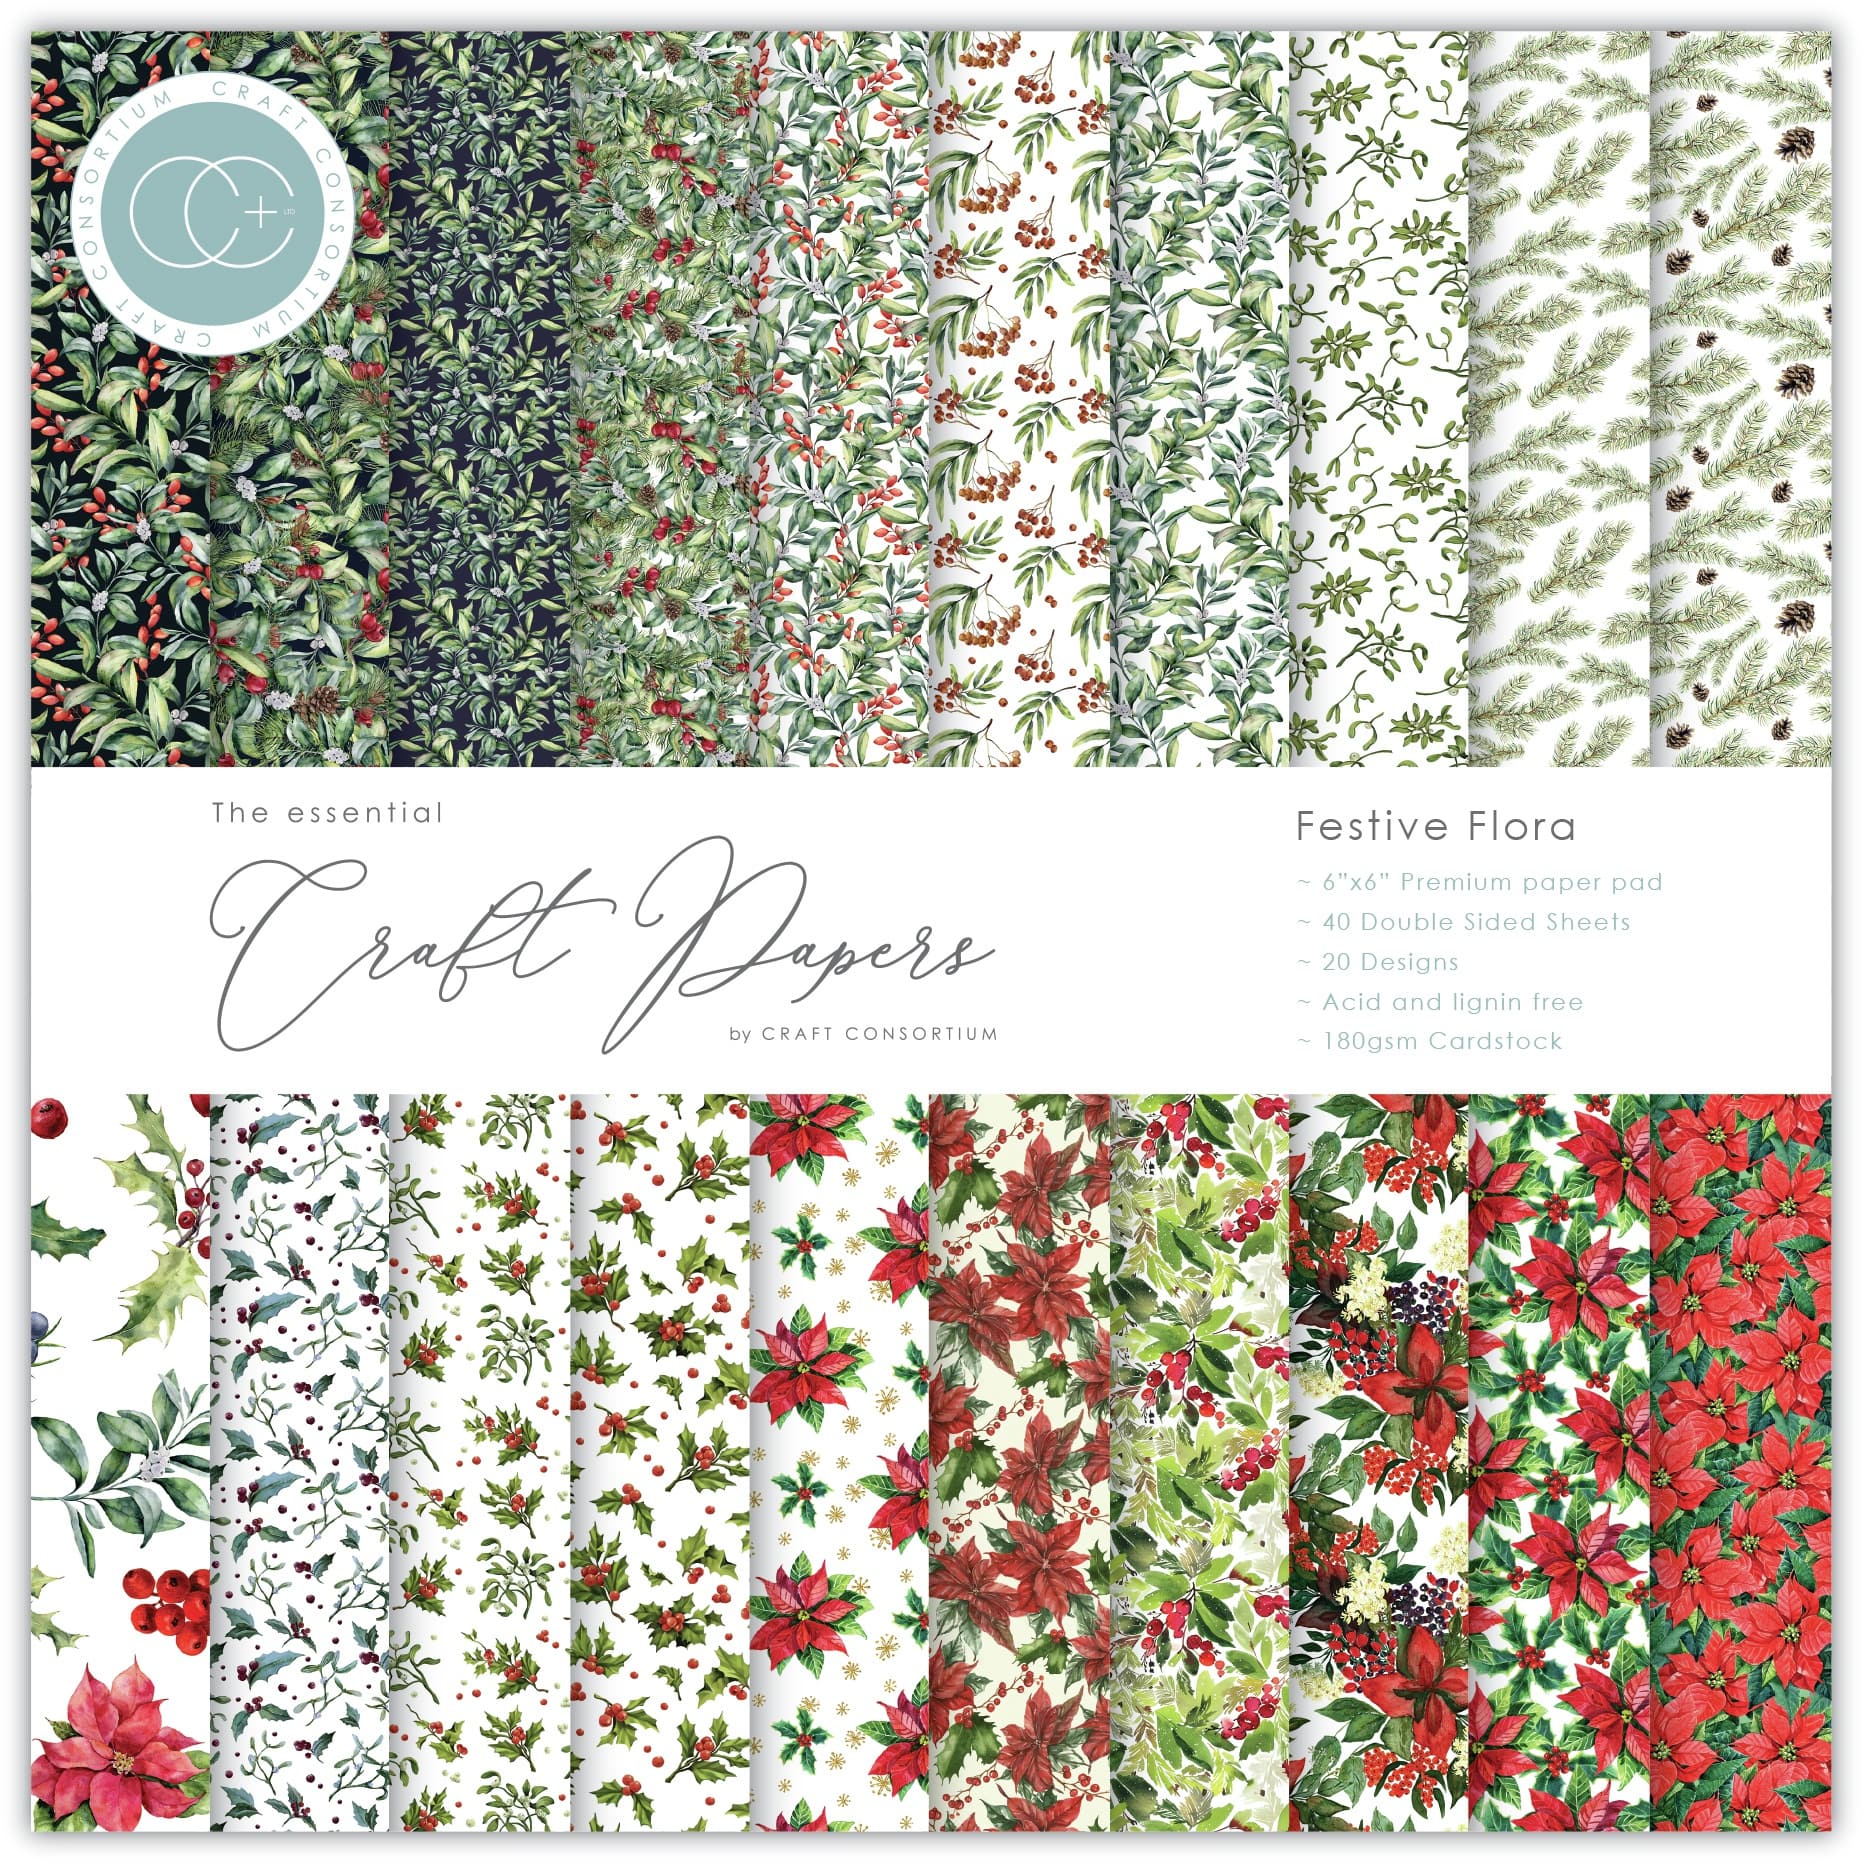 Christmas Scrapbook Paper: 20 patterned double sided sheets. 8.5 x 11  (Decorative Craft Paper)